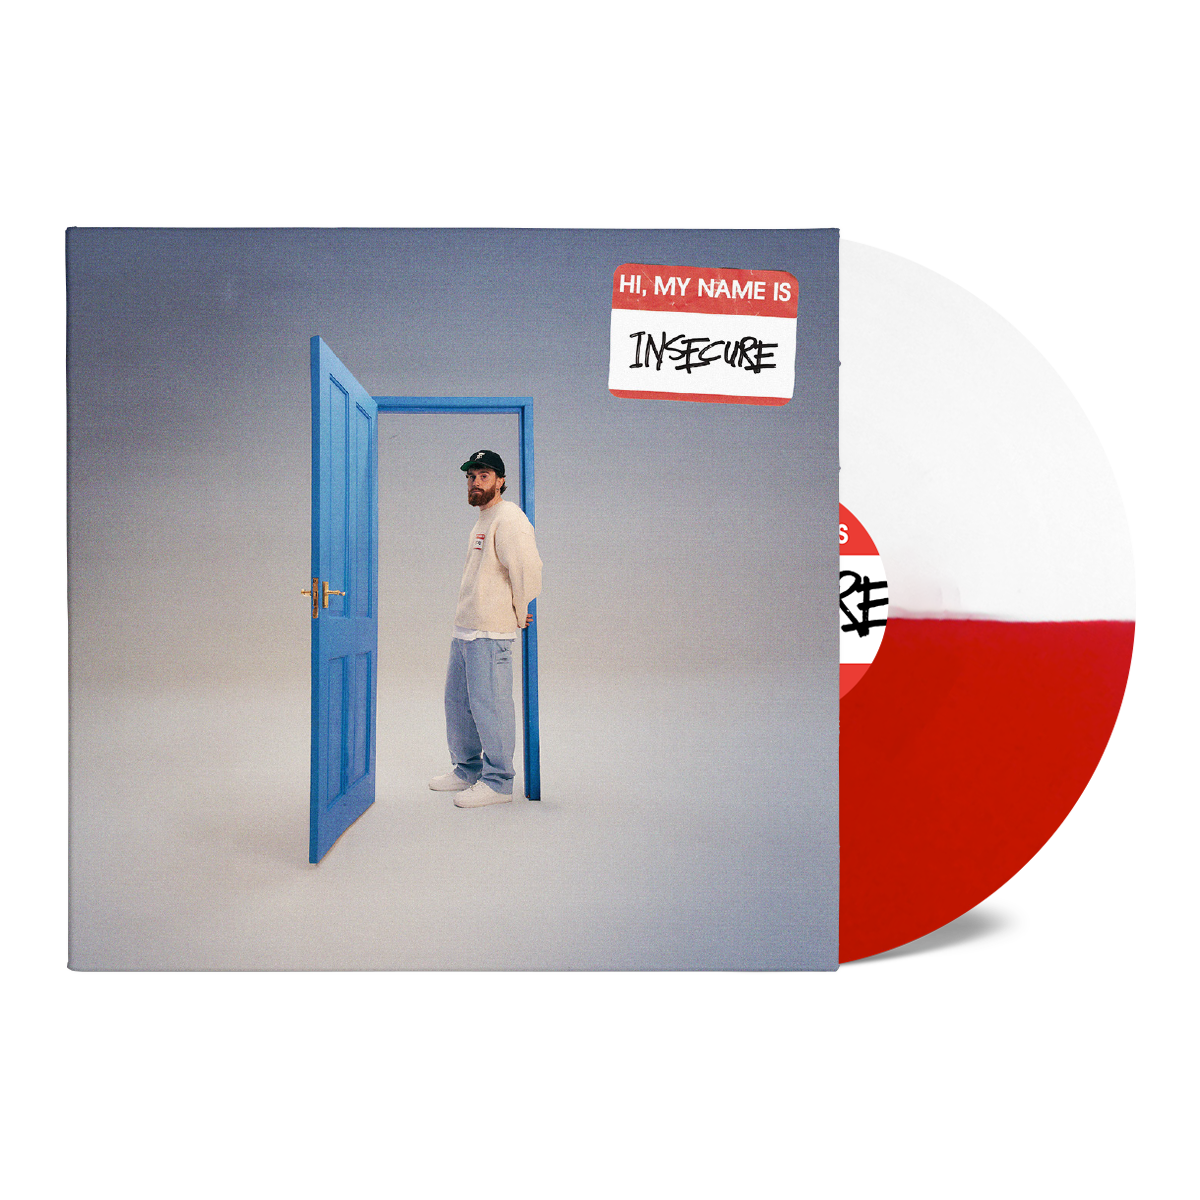 hi, my name is insecure - red/white vinyl, t-shirt & signed art card